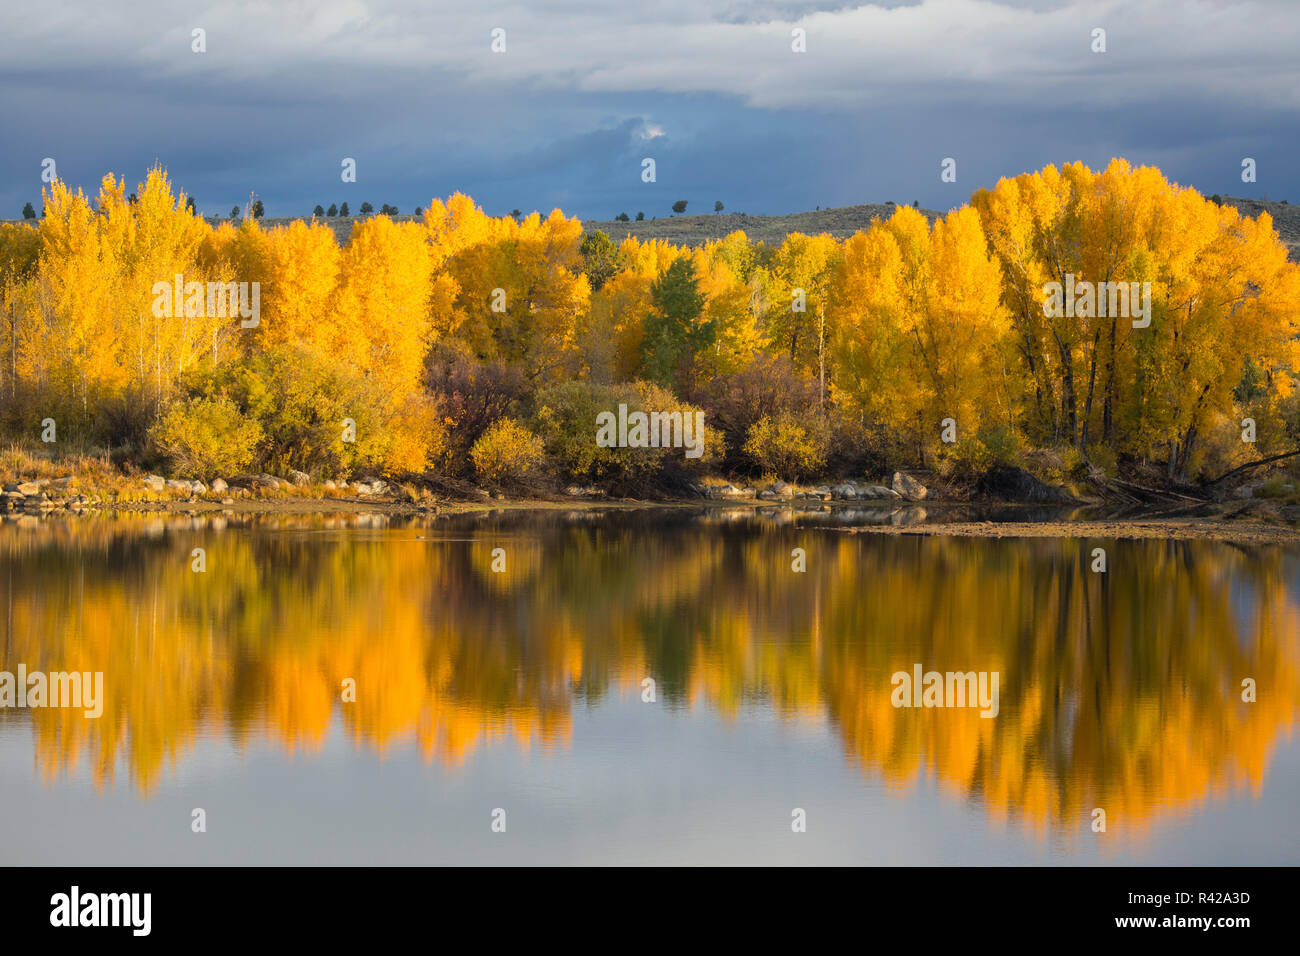 USA, Wyoming, Sublette County. The Cottonwood trees reflect their autumn color in the CCC ponds near Pinedale, Wyoming. Stock Photo